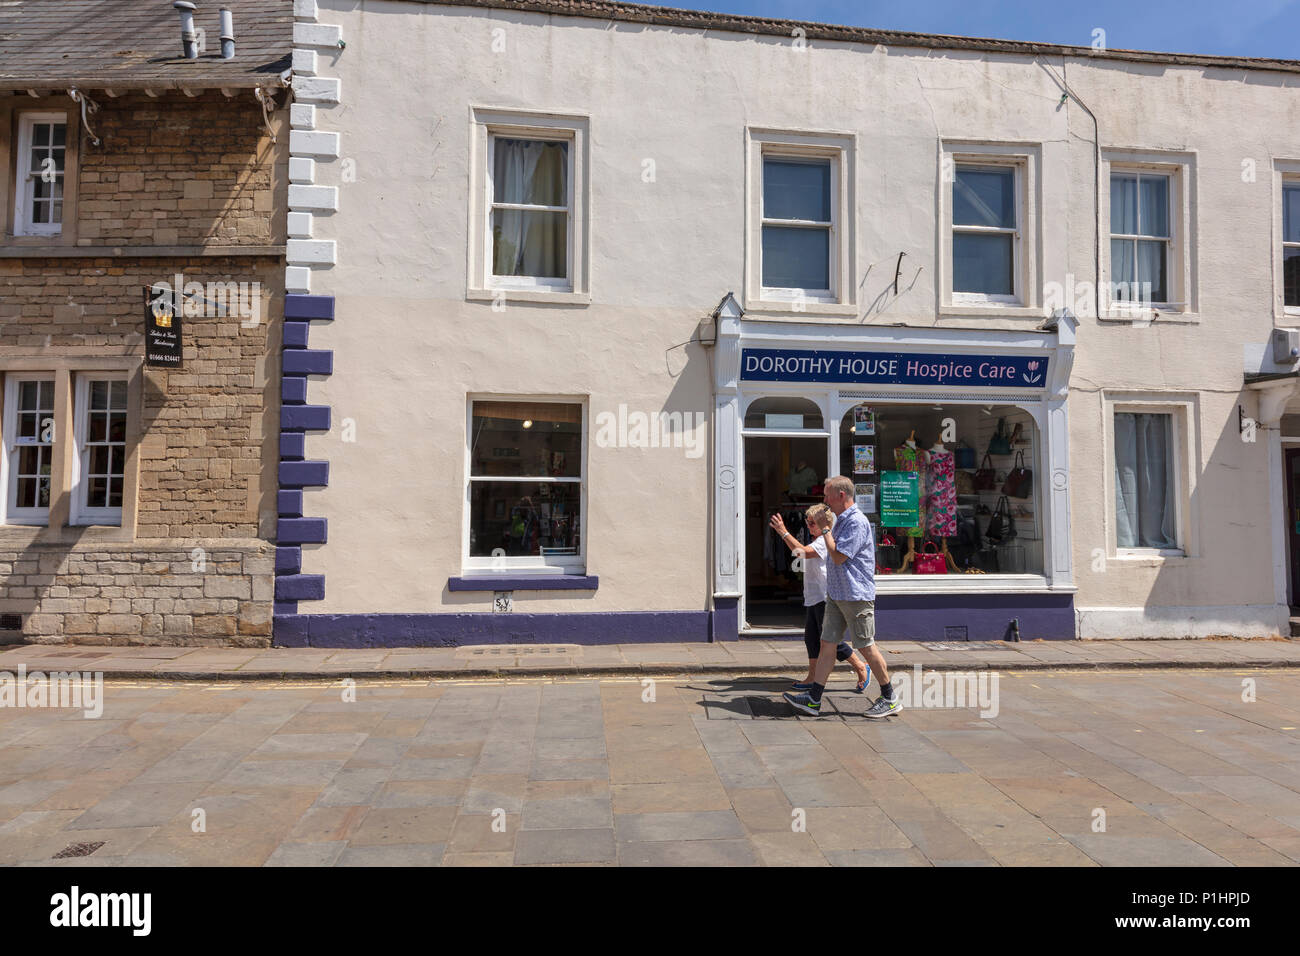 A couple walk past The Dorothy House Hospice charity shop on the Market Square, Malmesbury, Wiltshire, UK. The man is vaping. Stock Photo